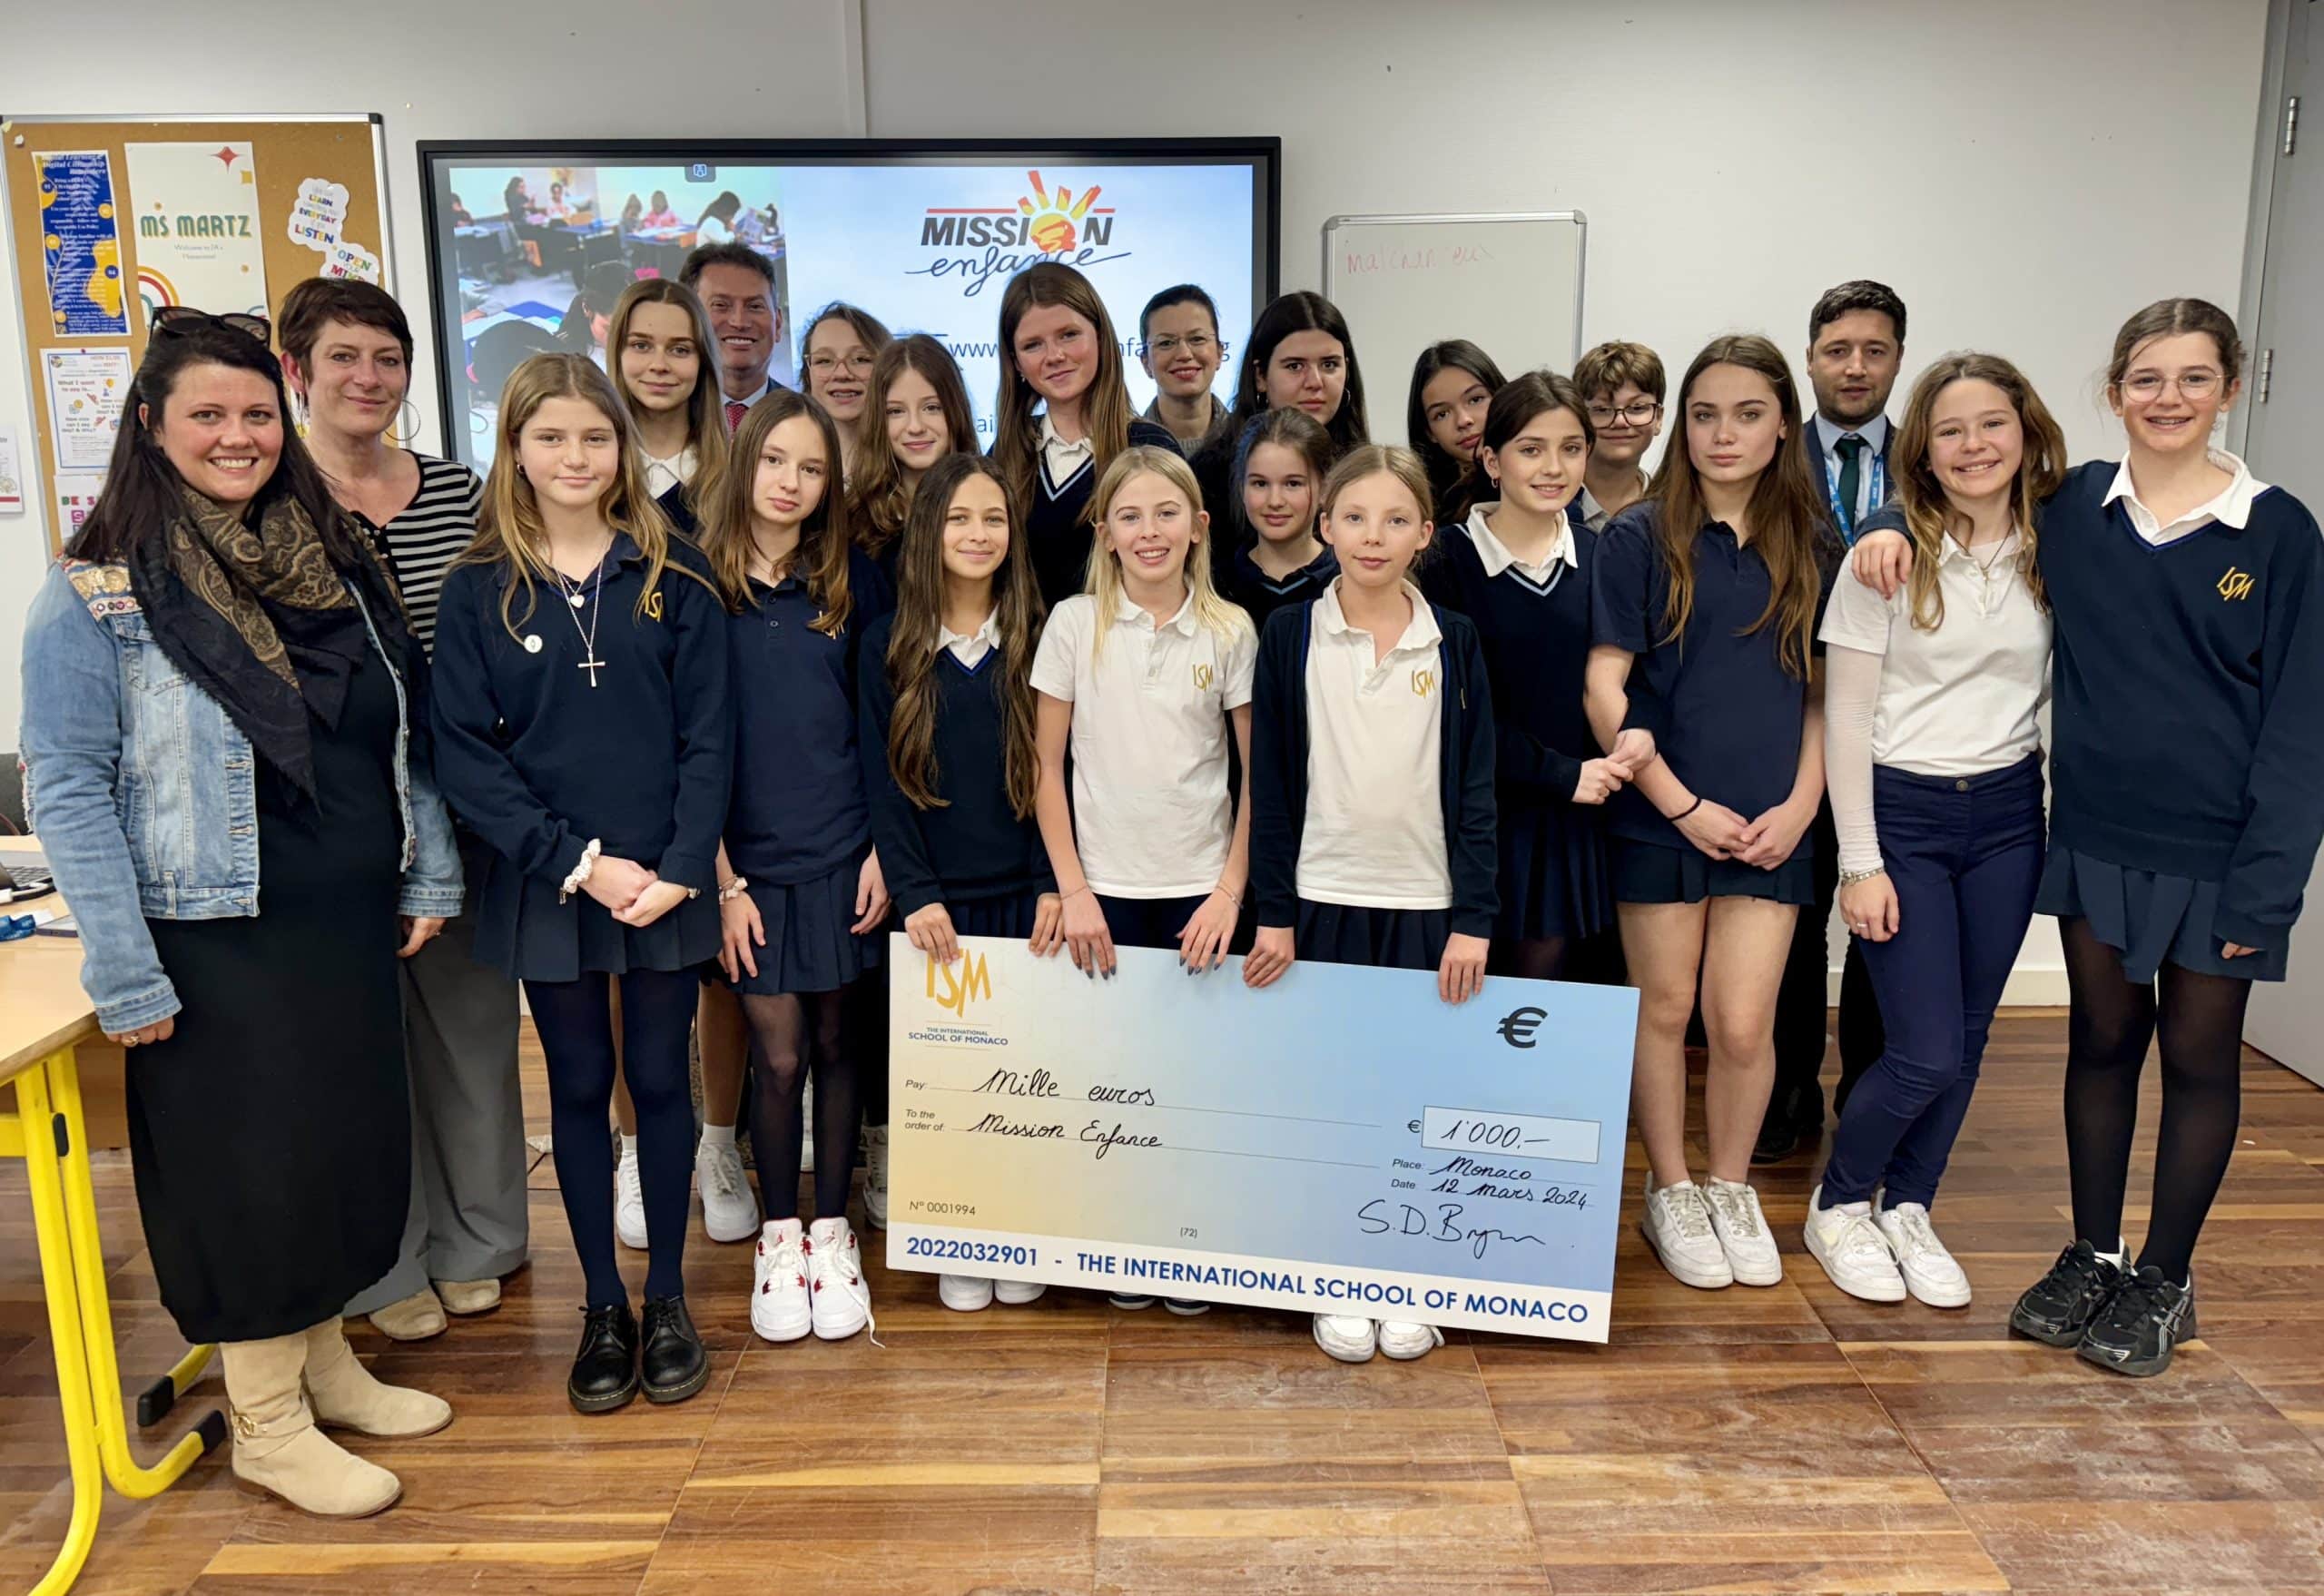 Philanthropy Club & PTA support children with donation to Mission Enfance Image